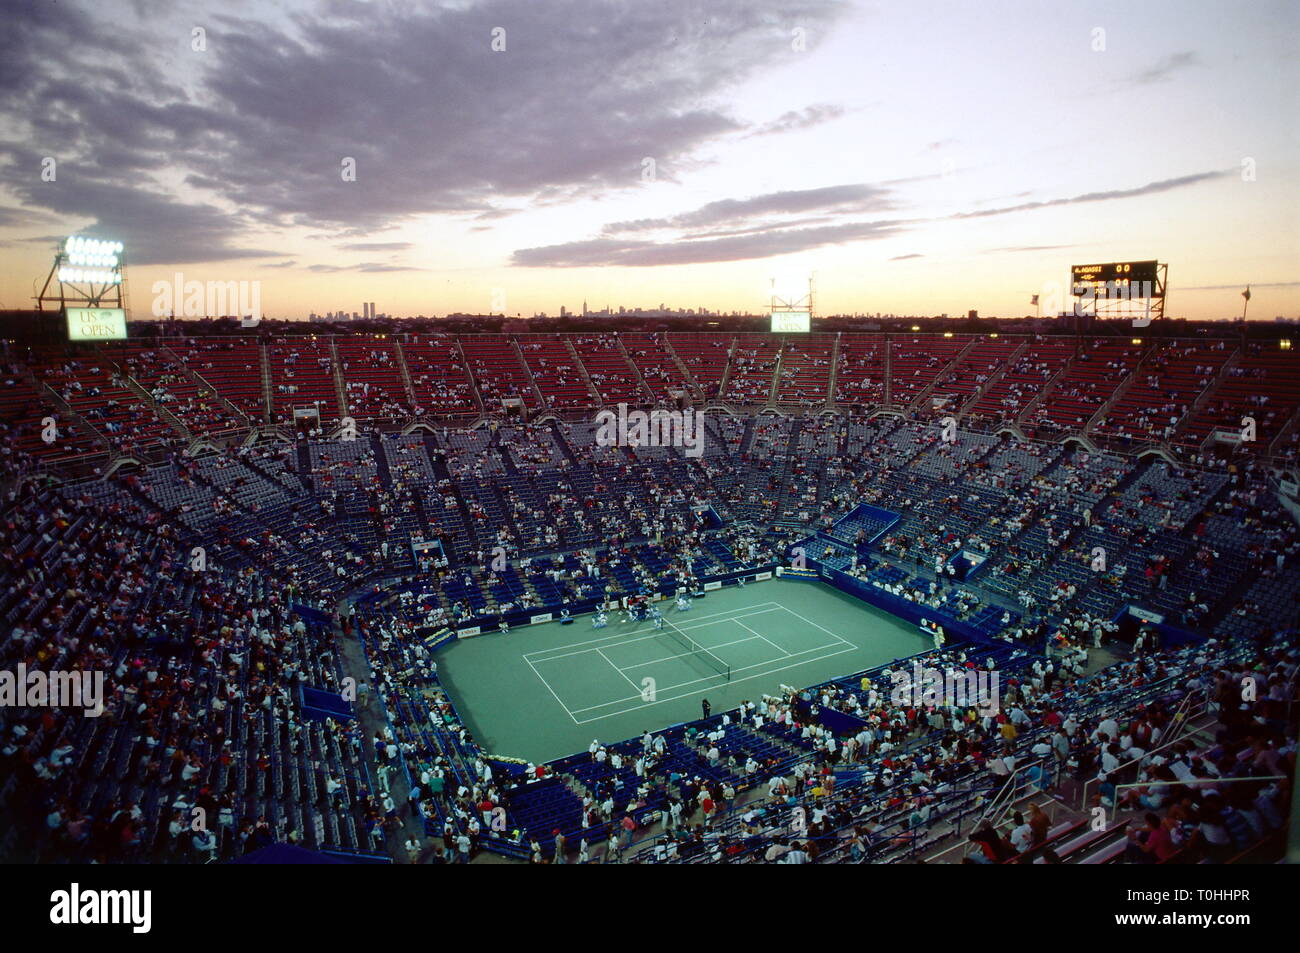 Sport, Tennis, US Open, Flushing Meadows, Agassi gegen Johnson, New York, 1990 s, Additional-Rights - Clearance-Info - Not-Available Stockfoto